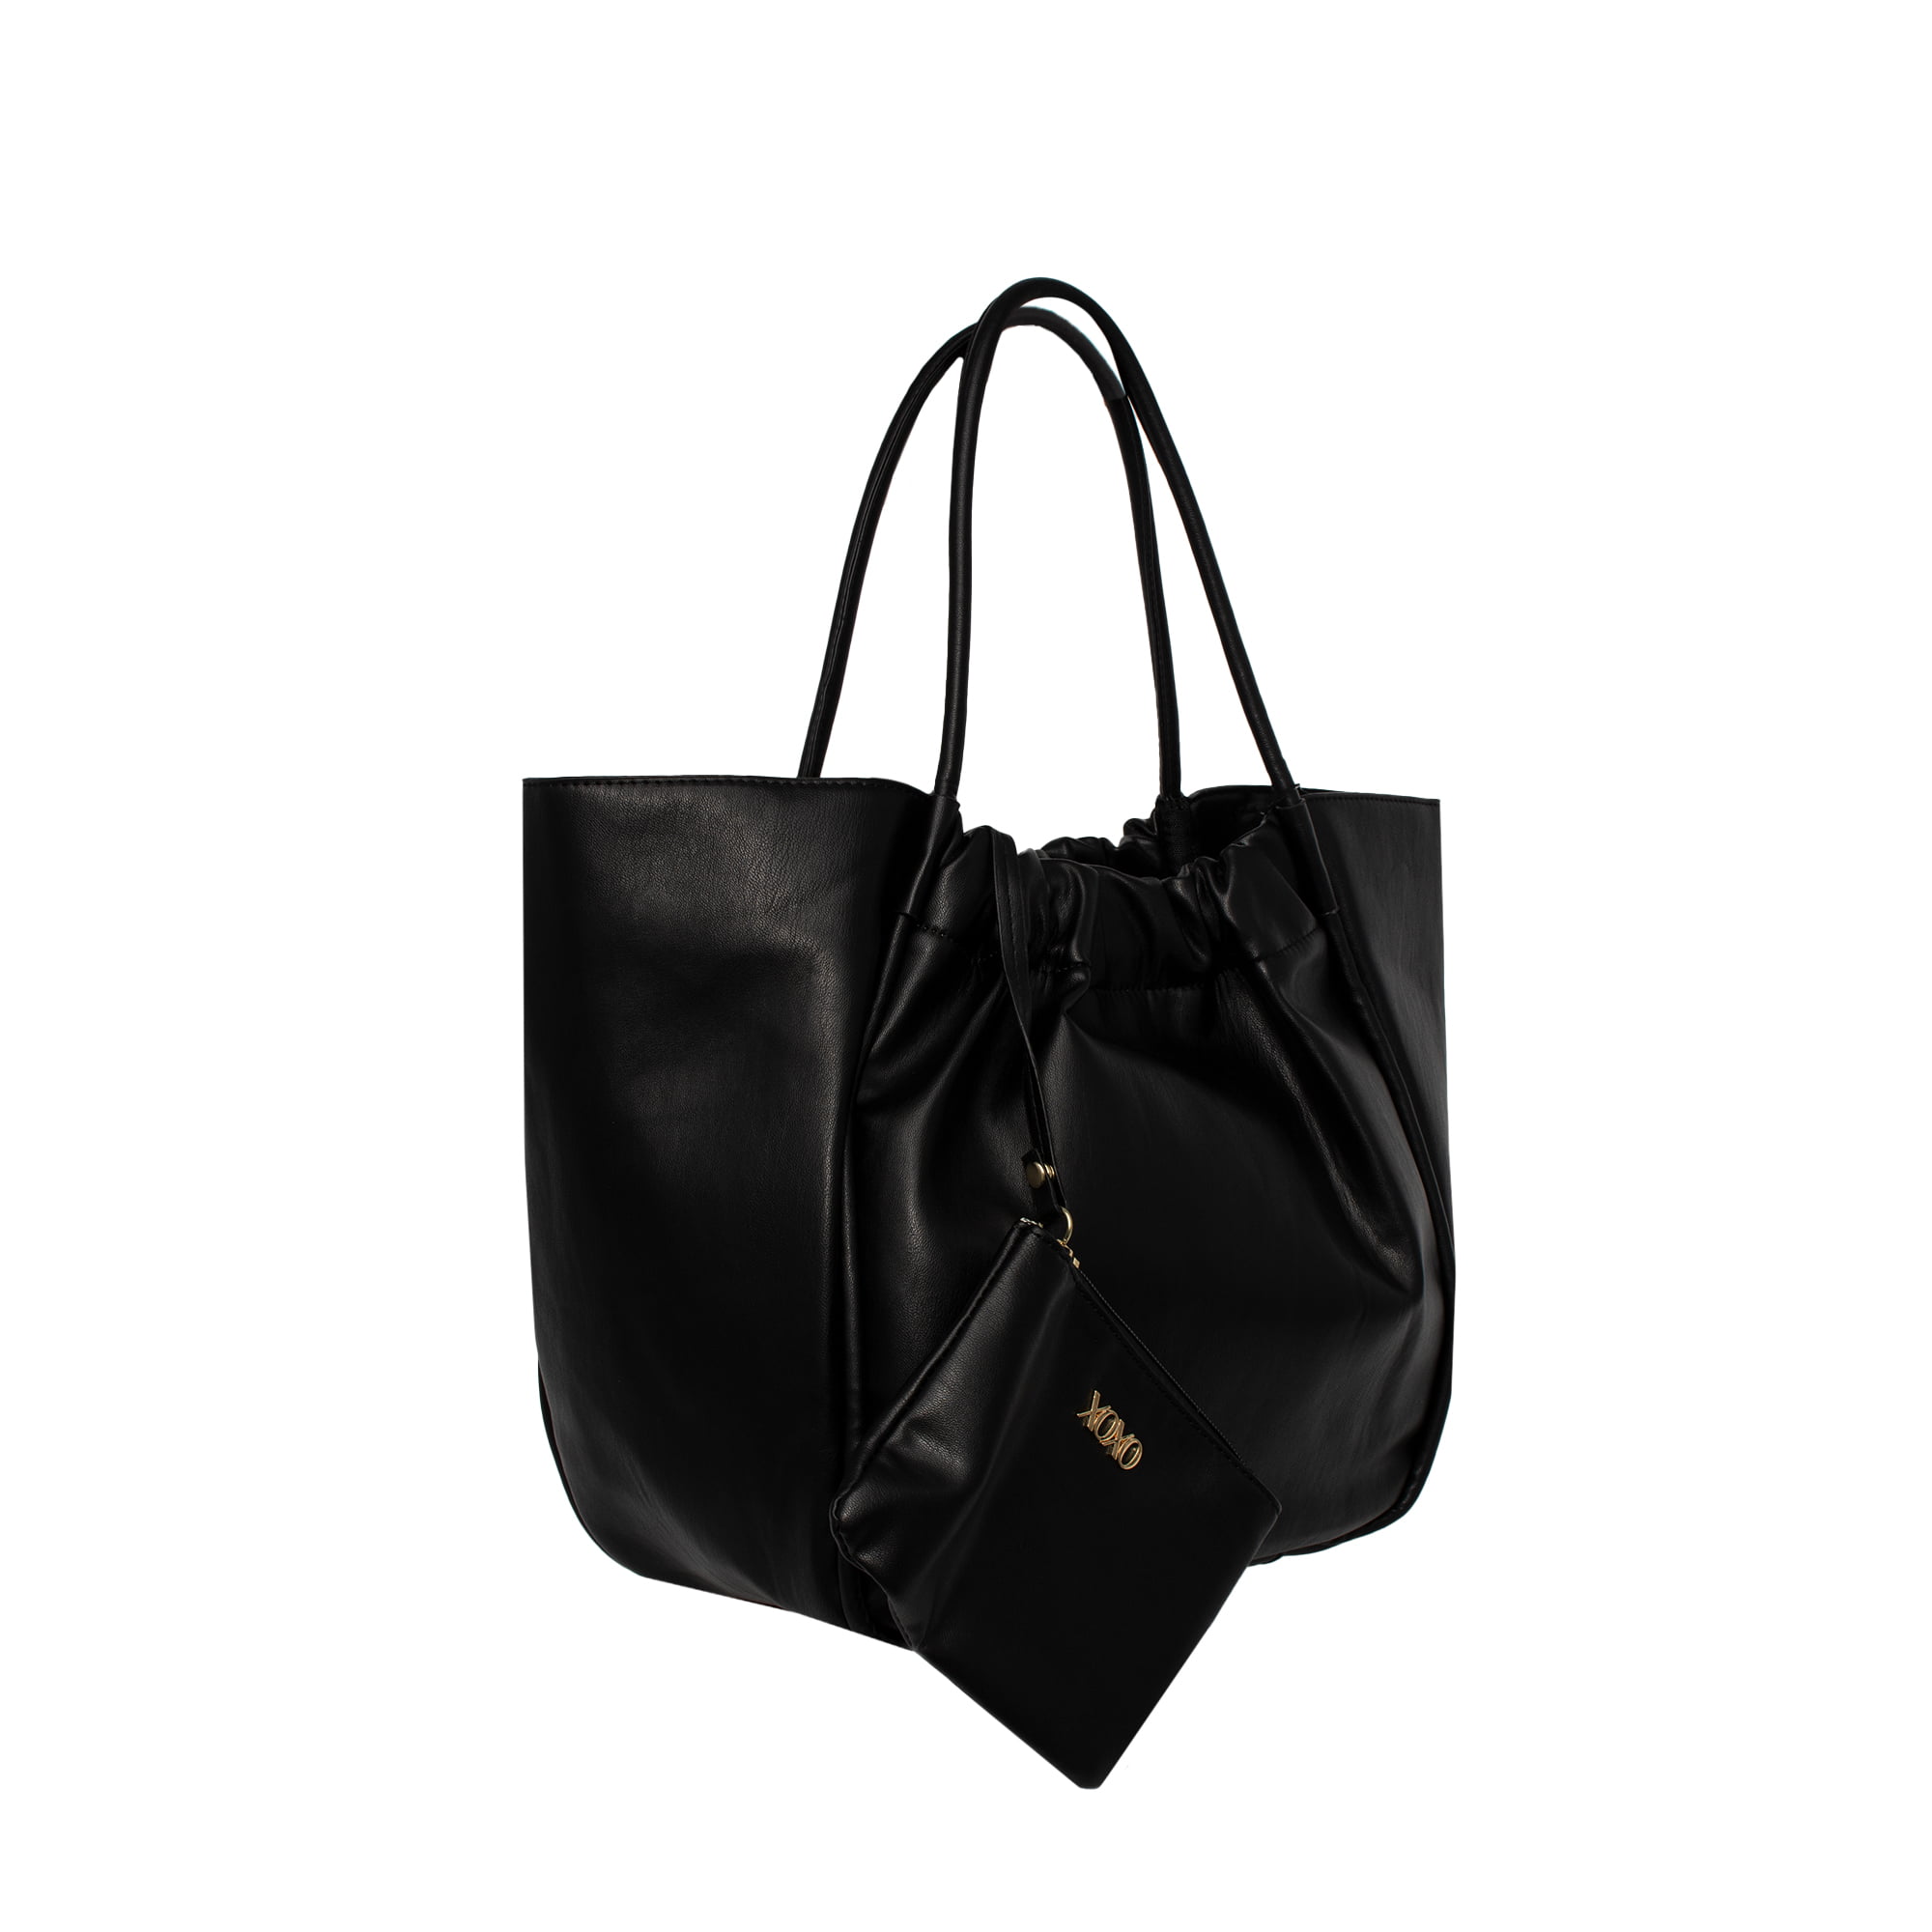 XOXO Women's Black Vegan Leather Quilted Tote Bag With Chain